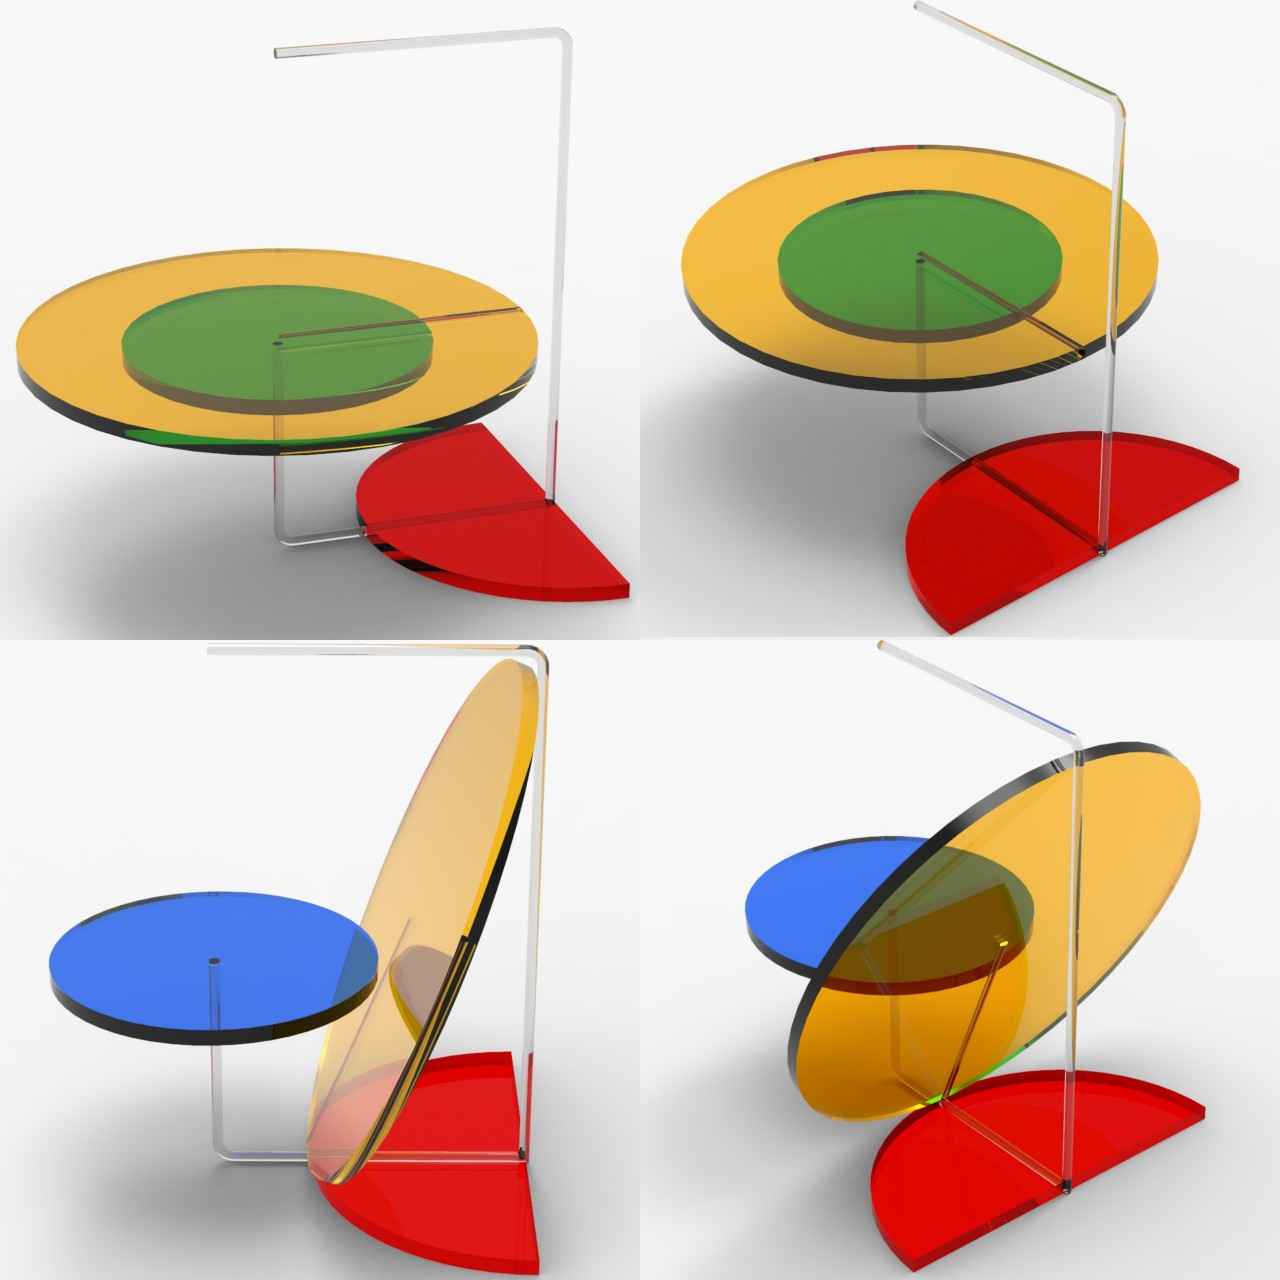 Playful coffee table concept brings Piet Mondrian’s three colors to your home